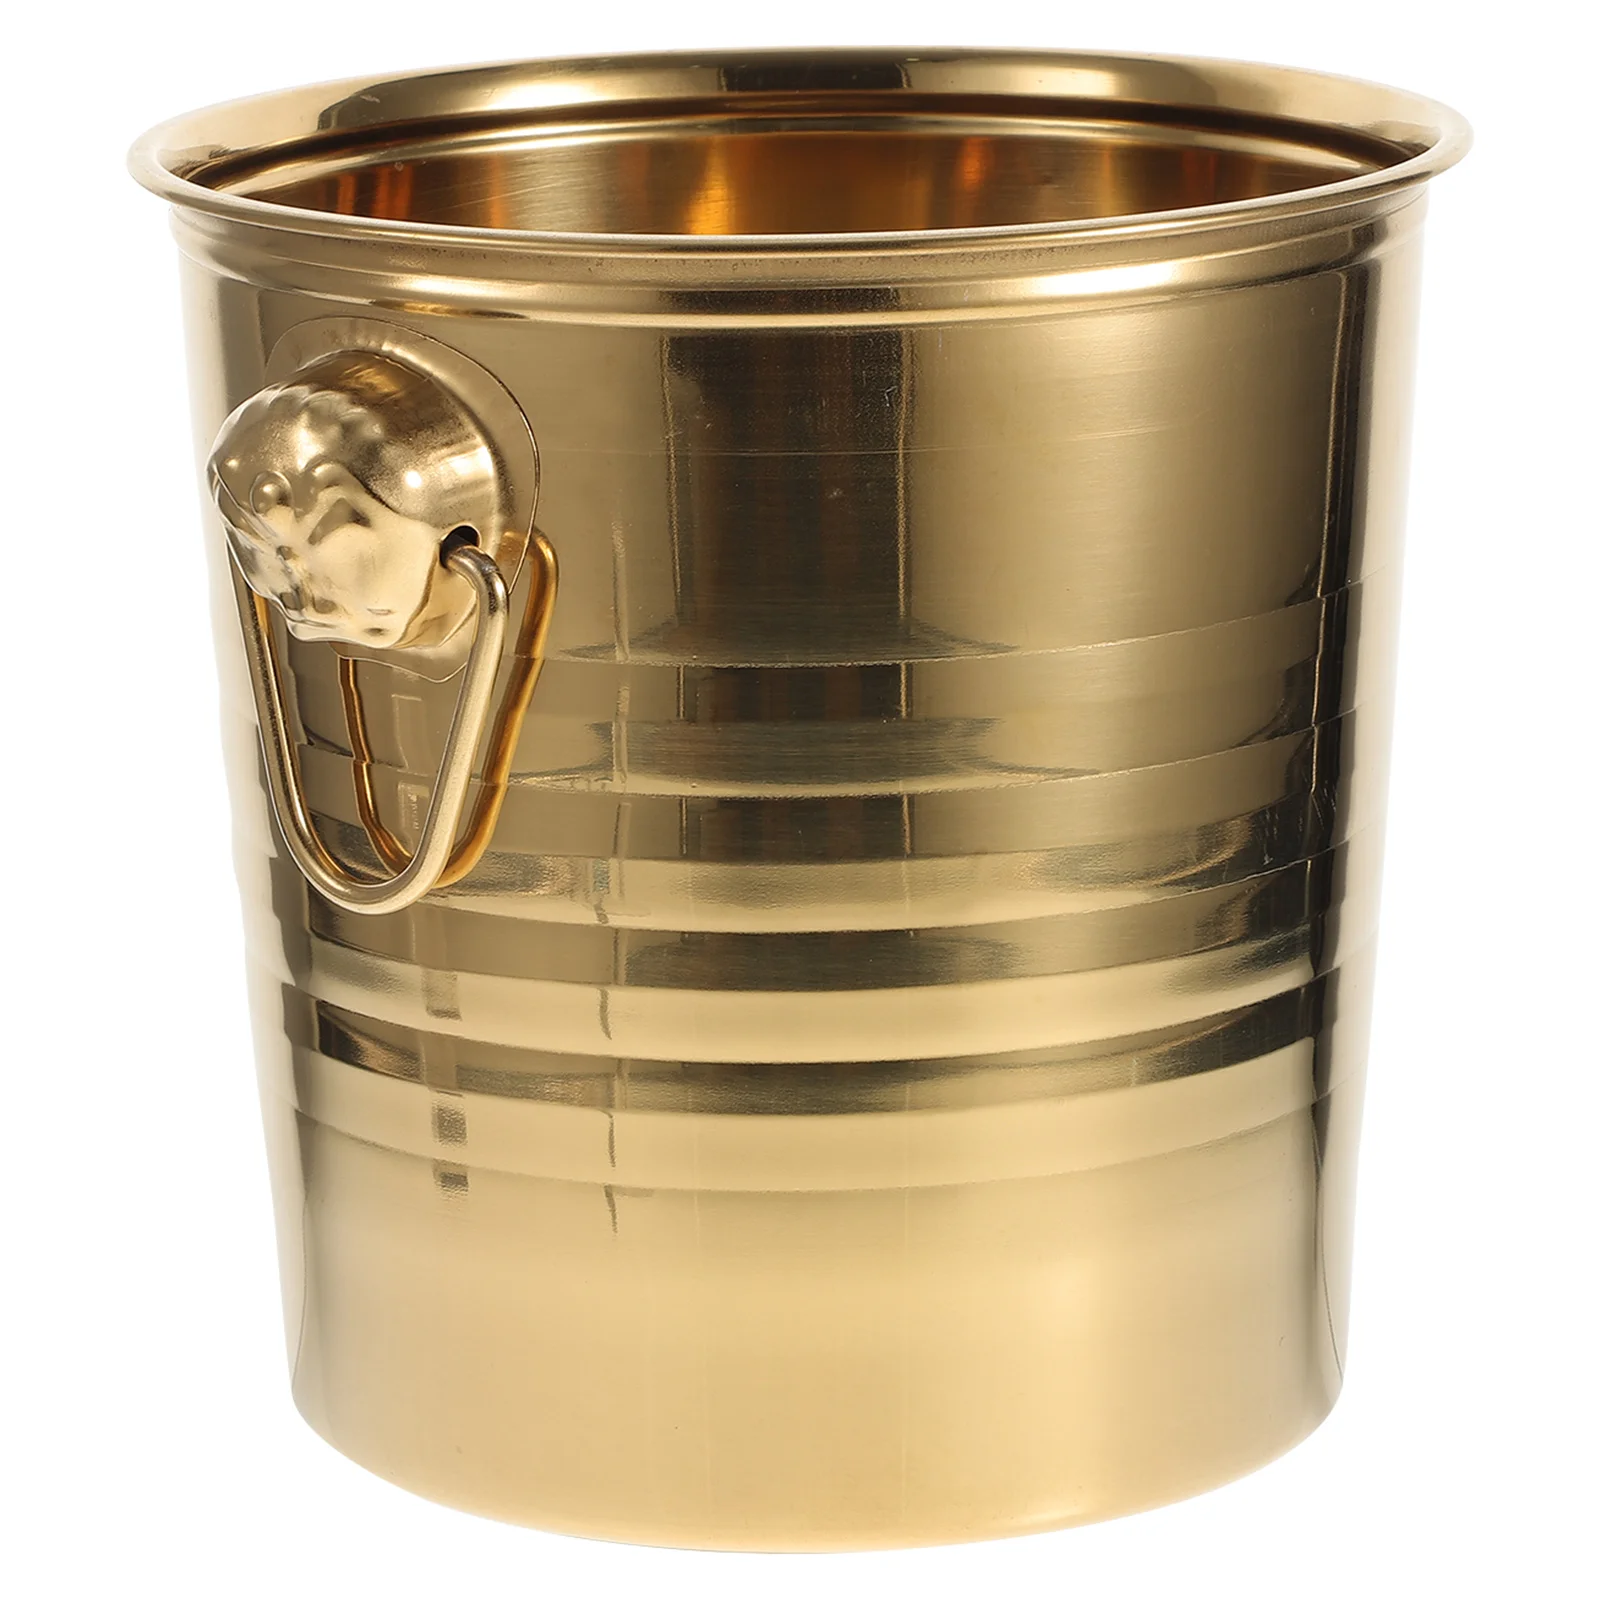 

Stainless Steel Bucket Insulated Bucket Cooler Beverage Tub With Handle Bucket Beer Bottles Tub for Cocktail Bar Ice